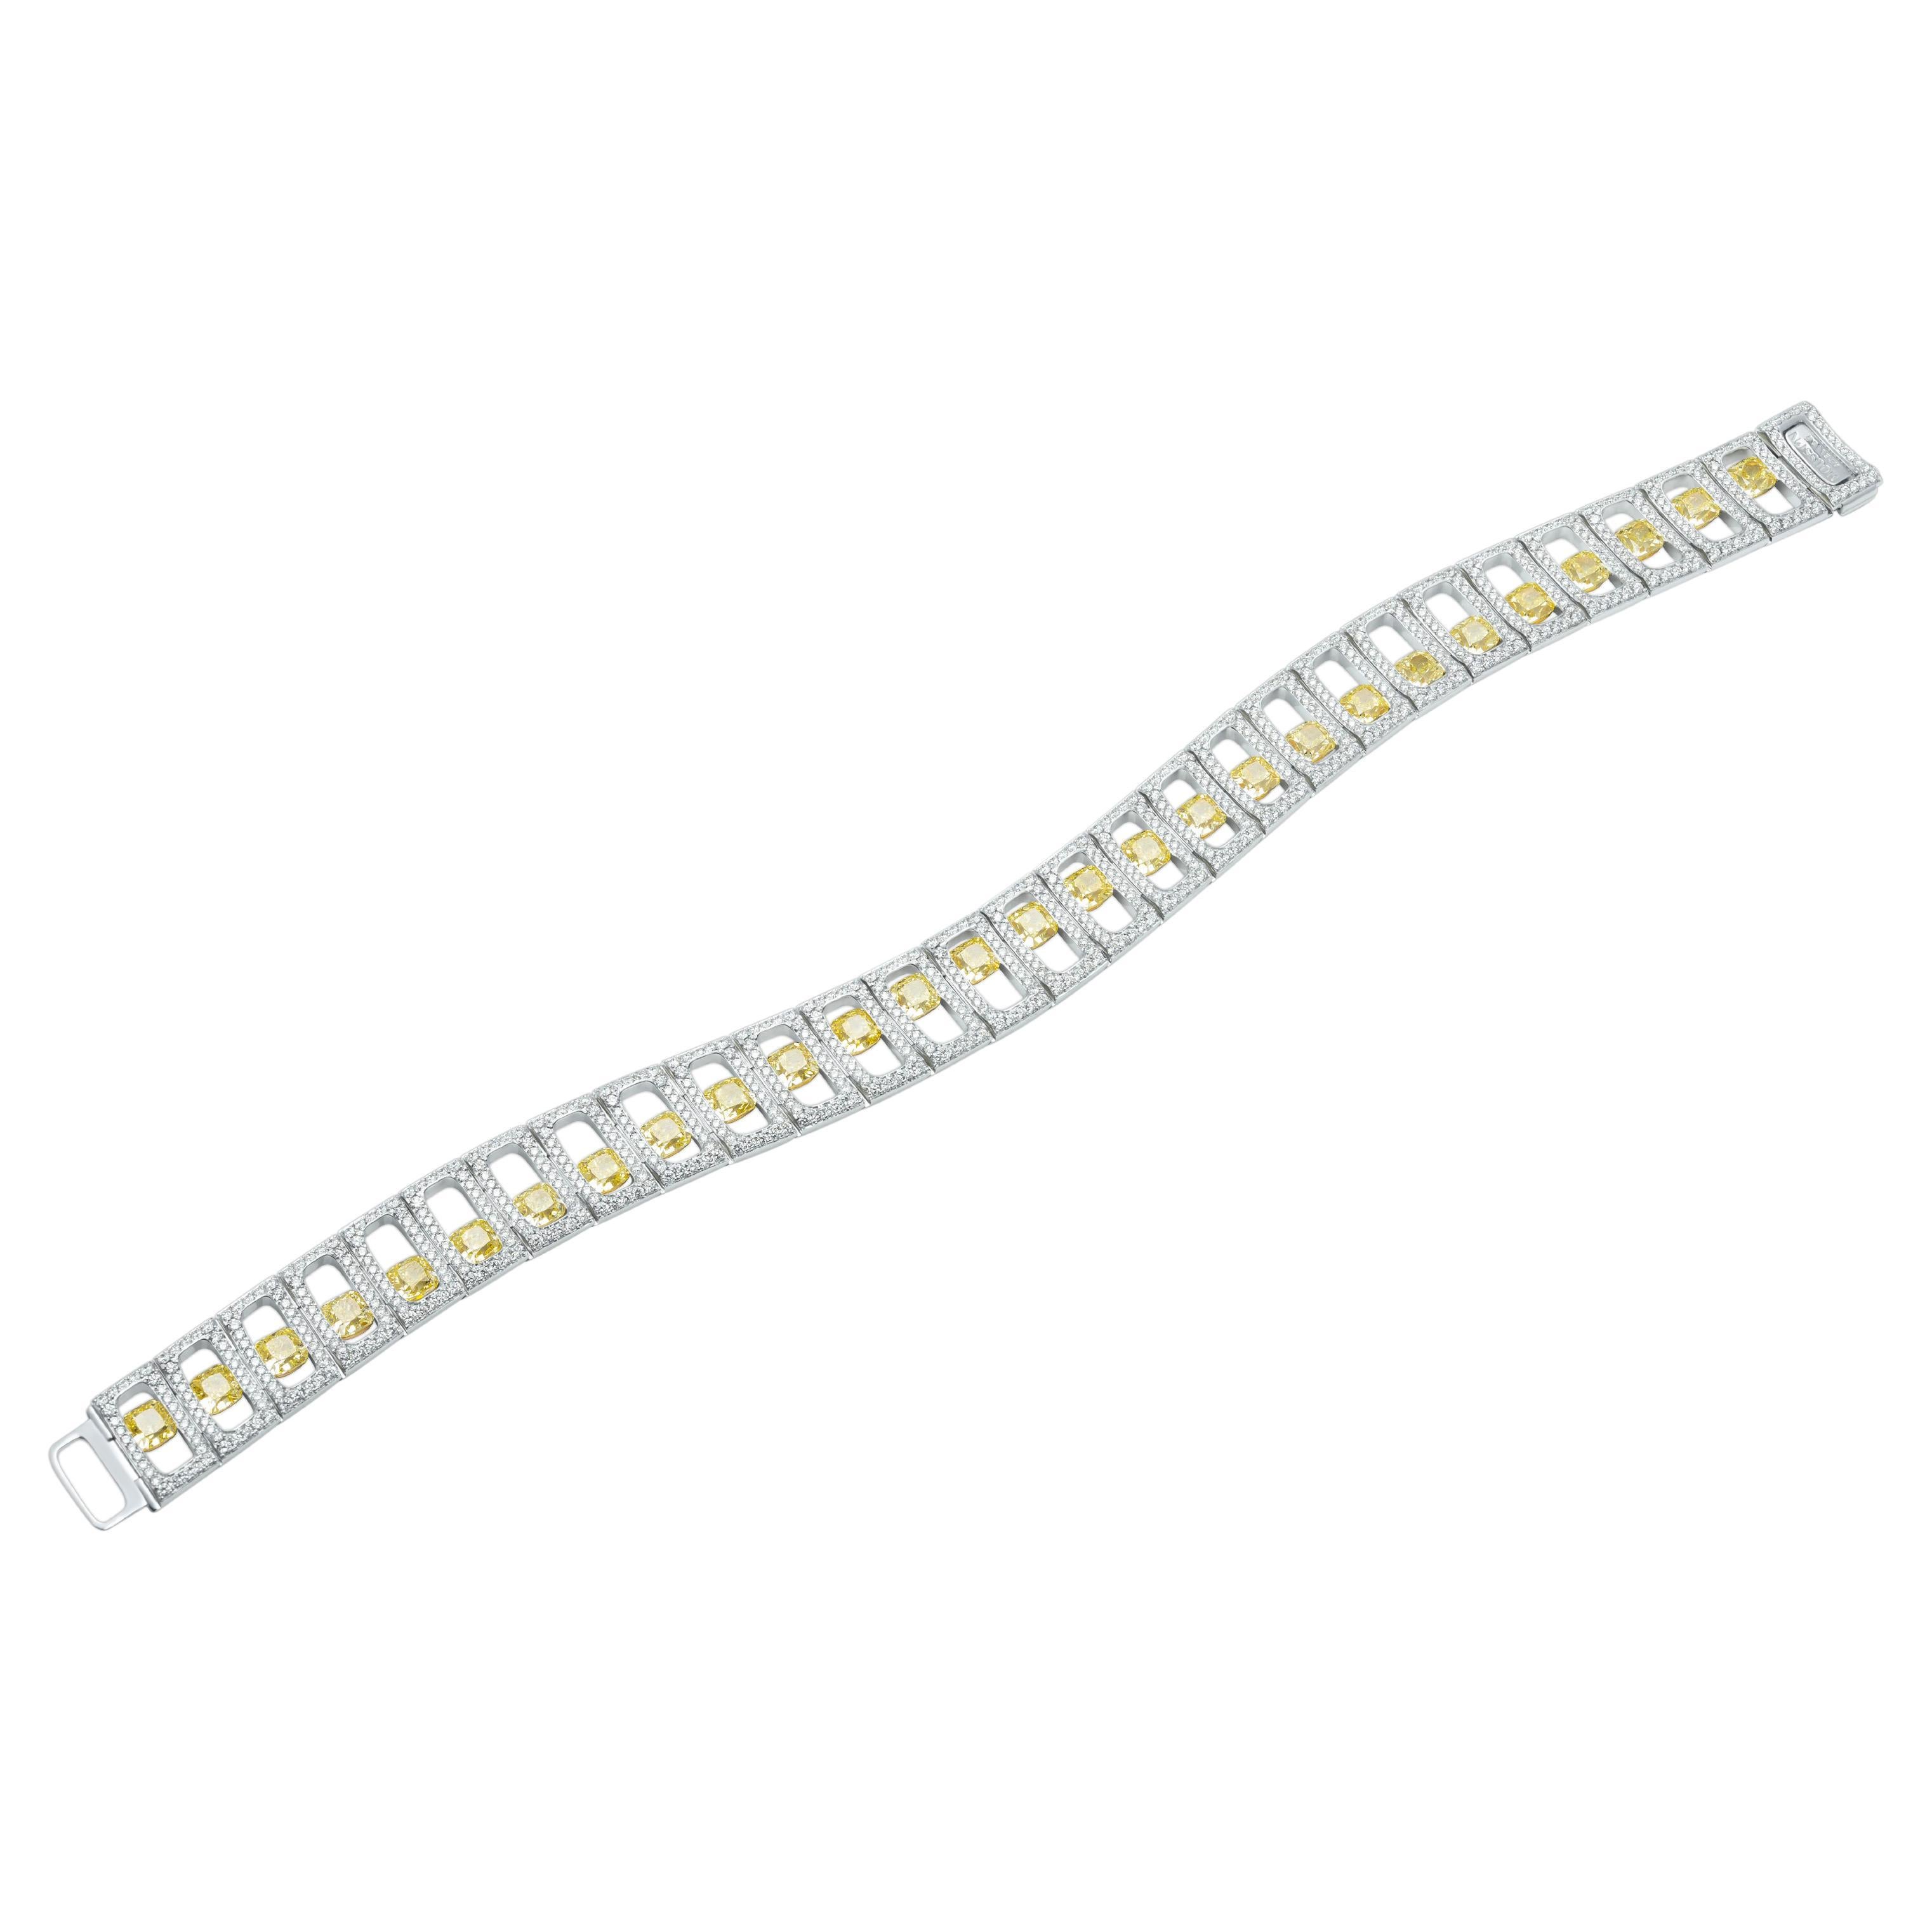 Yellow Diamonds 8.19 Carats Diamonds 18 Karat White Gold High Jewellery Bracelet

Introducing our latest creation, the bracelet, inspired by the Art Deco era. This stunning piece features 28 exquisite yellow diamonds with a total weight of 8,19ct.,